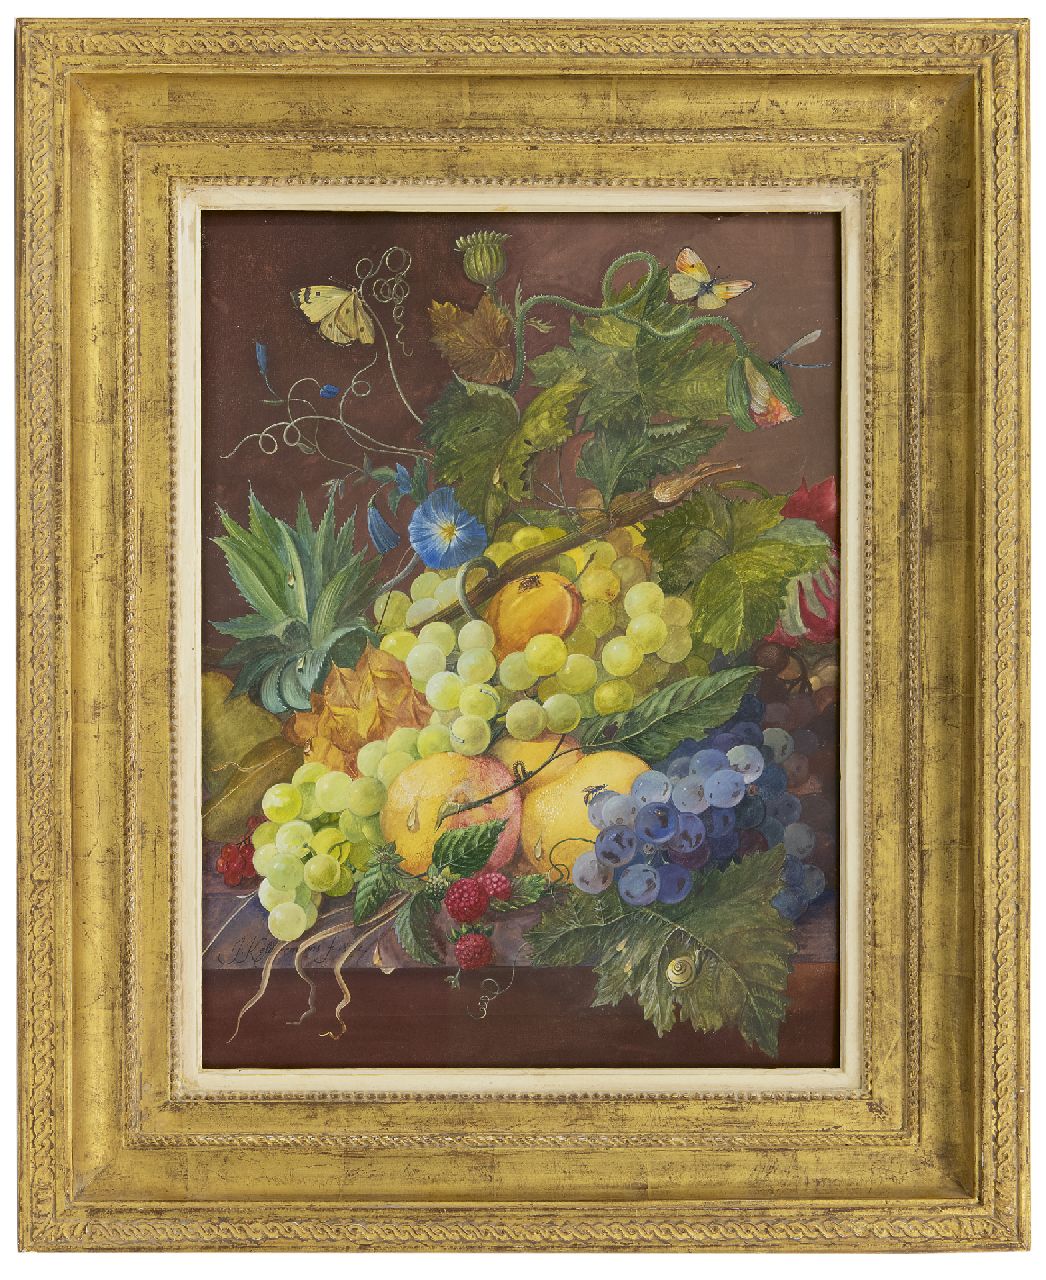 Keldermans J.  | J. Keldermans | Watercolours and drawings offered for sale | A still life with flowers and fruit, gouache on paper 43.2 x 32.0 cm, signed l.l. and dated 18(?)2